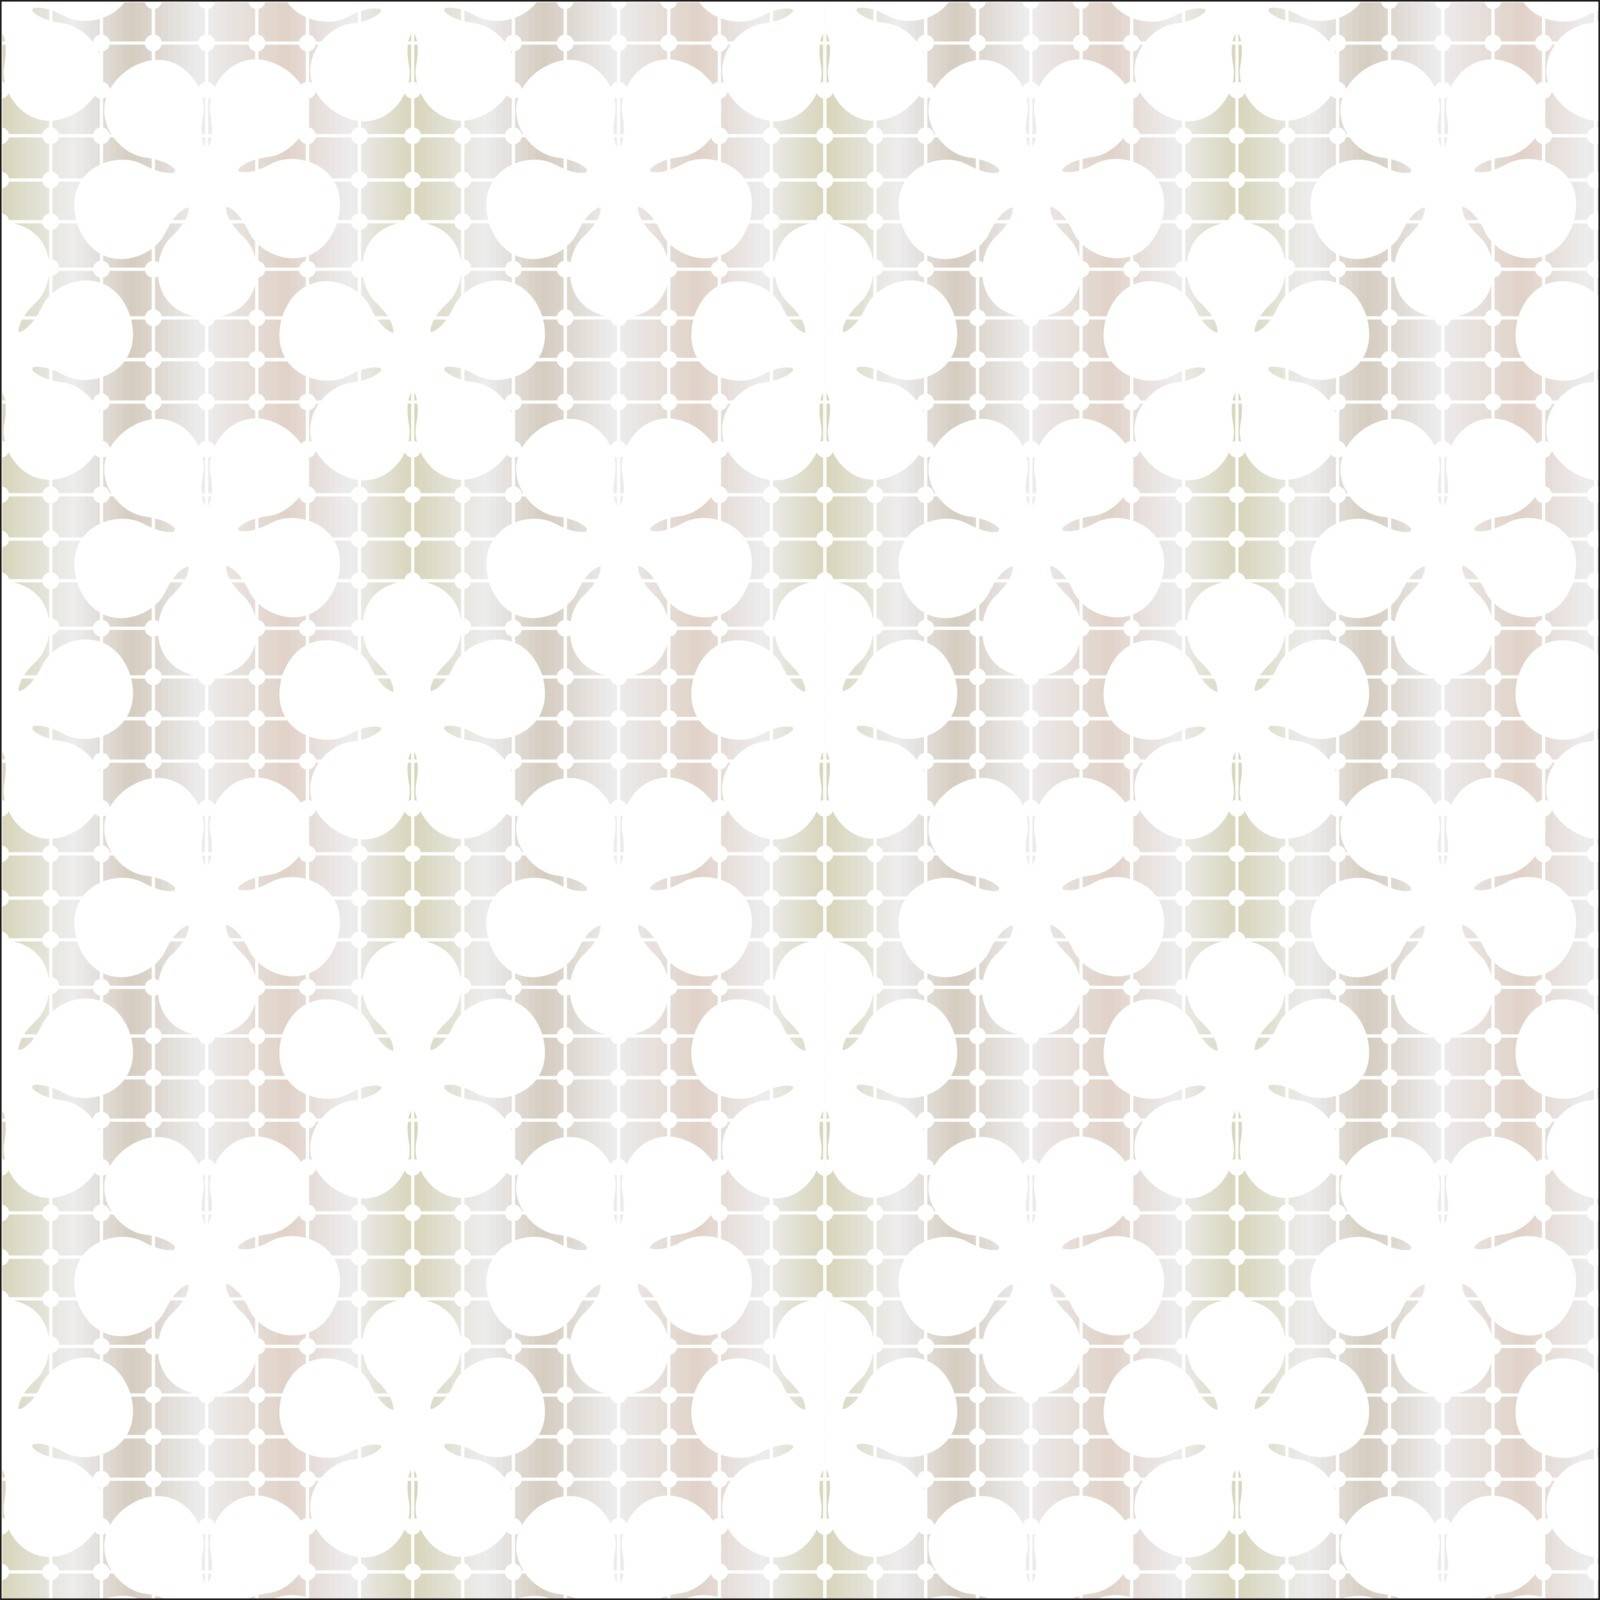 Floral wallpaper. Seamless by A7880S